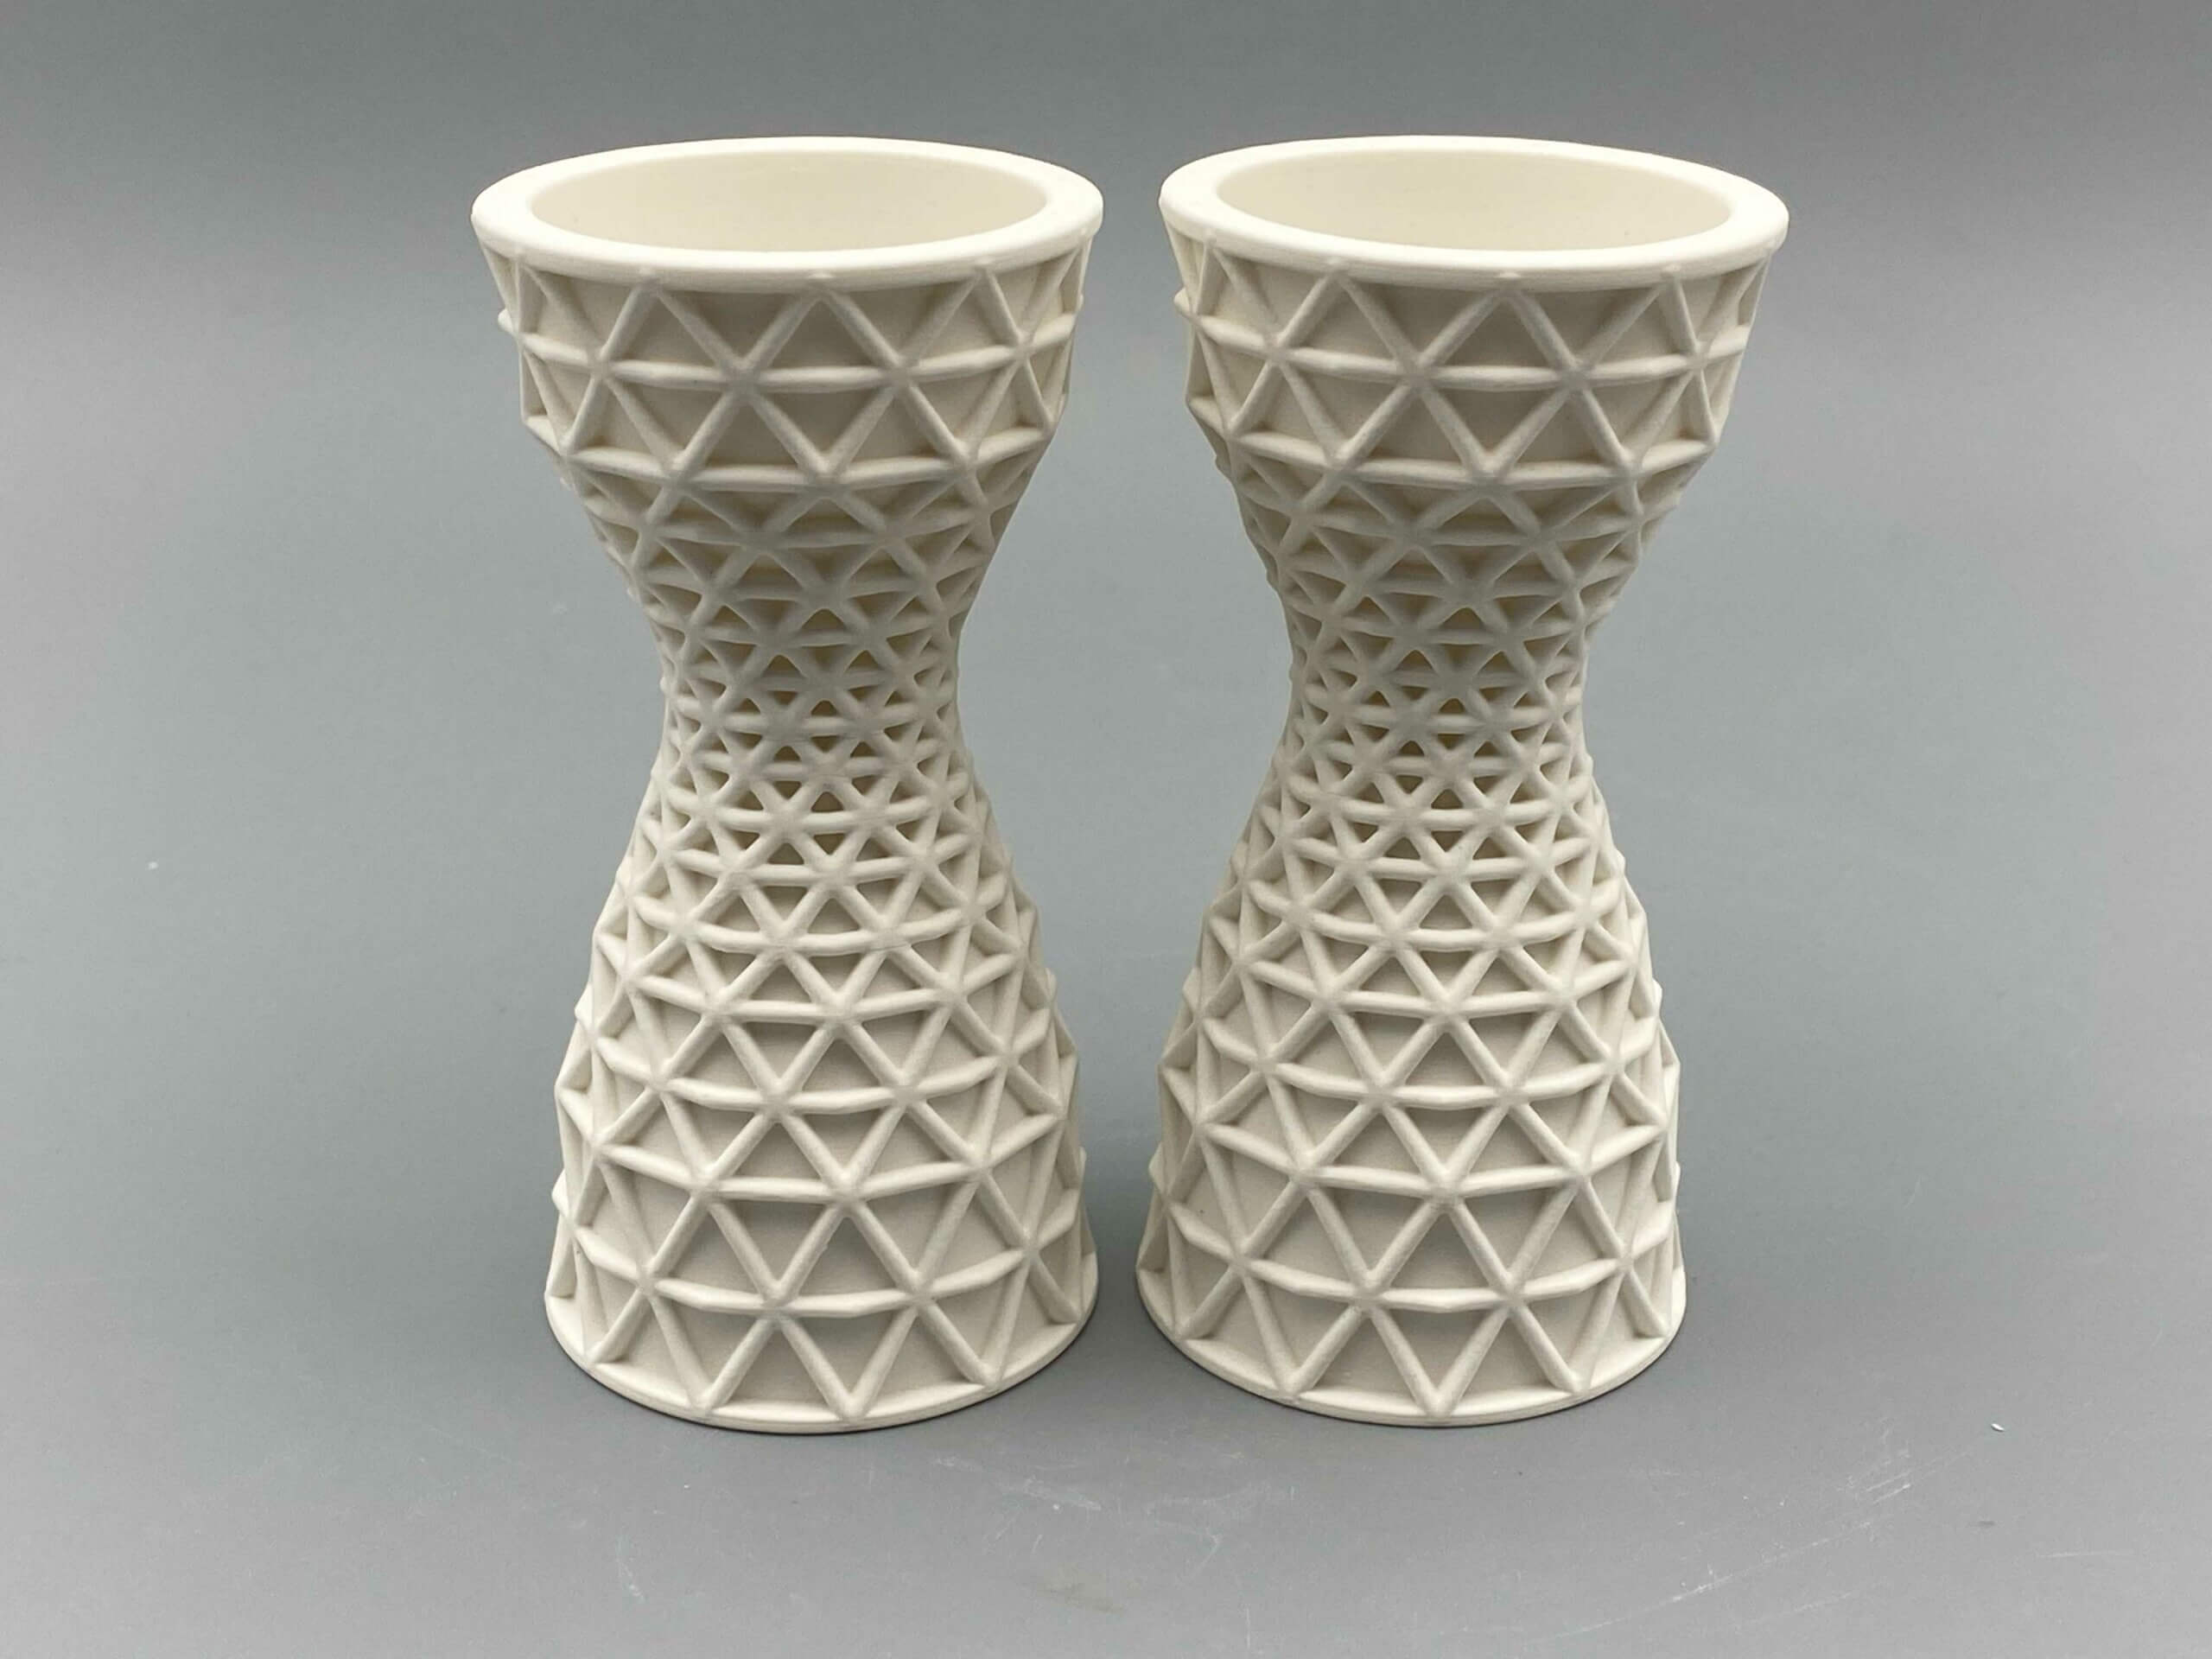 bund Vanding serie Fortify and Tethon 3D are exploring industrial 3D printing applications  with Technical Ceramics - 3D ADEPT MEDIA